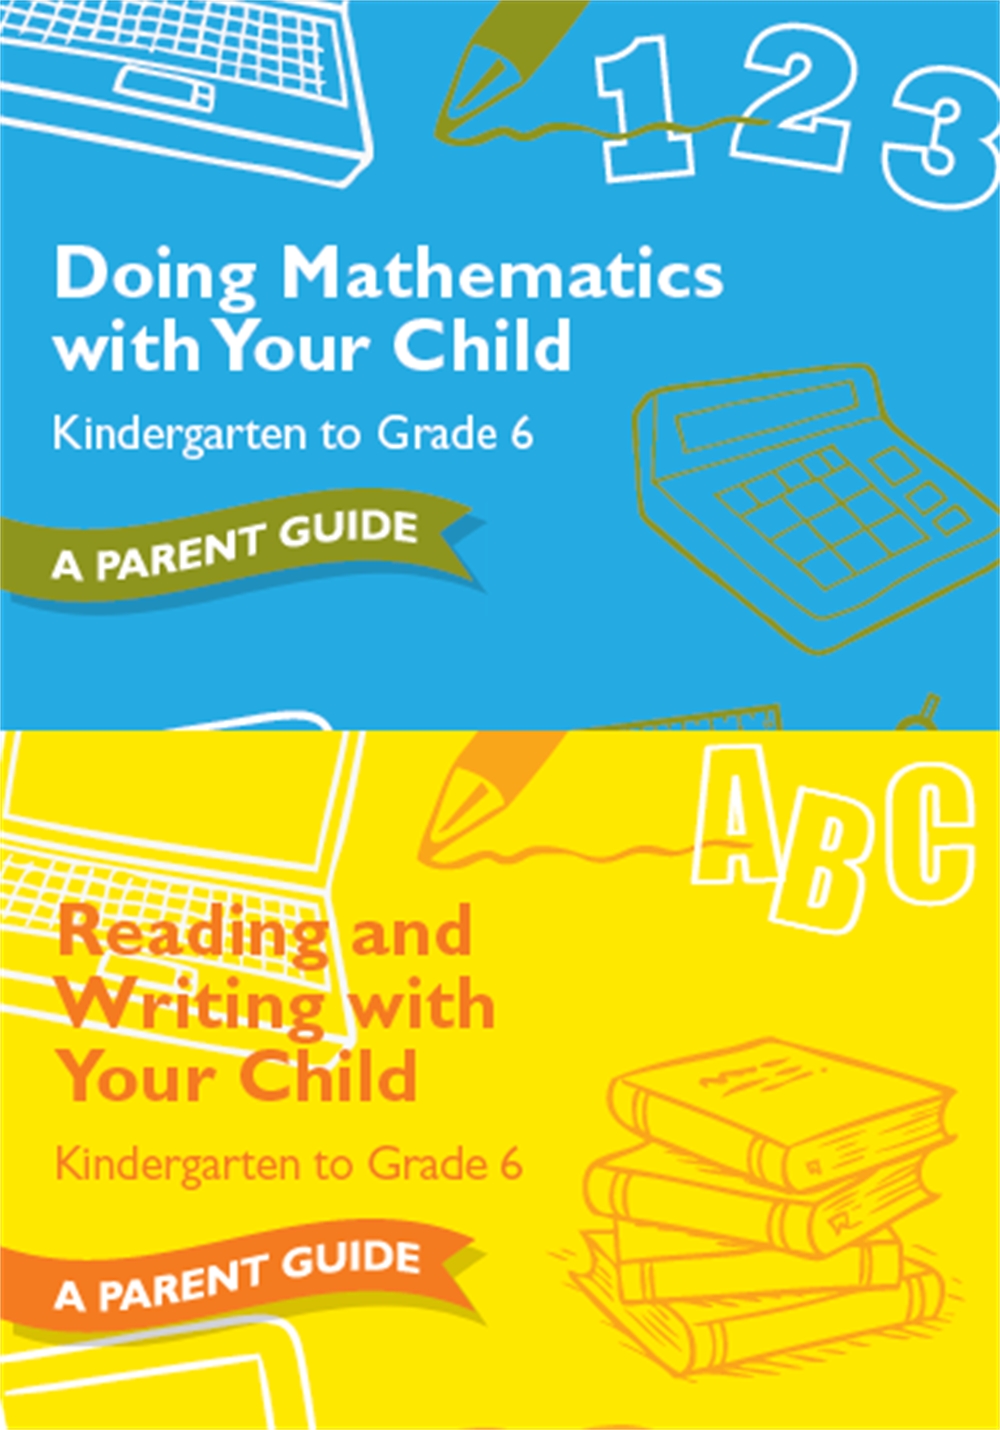 Doing Mathematics / Reading and Writing with Your Child